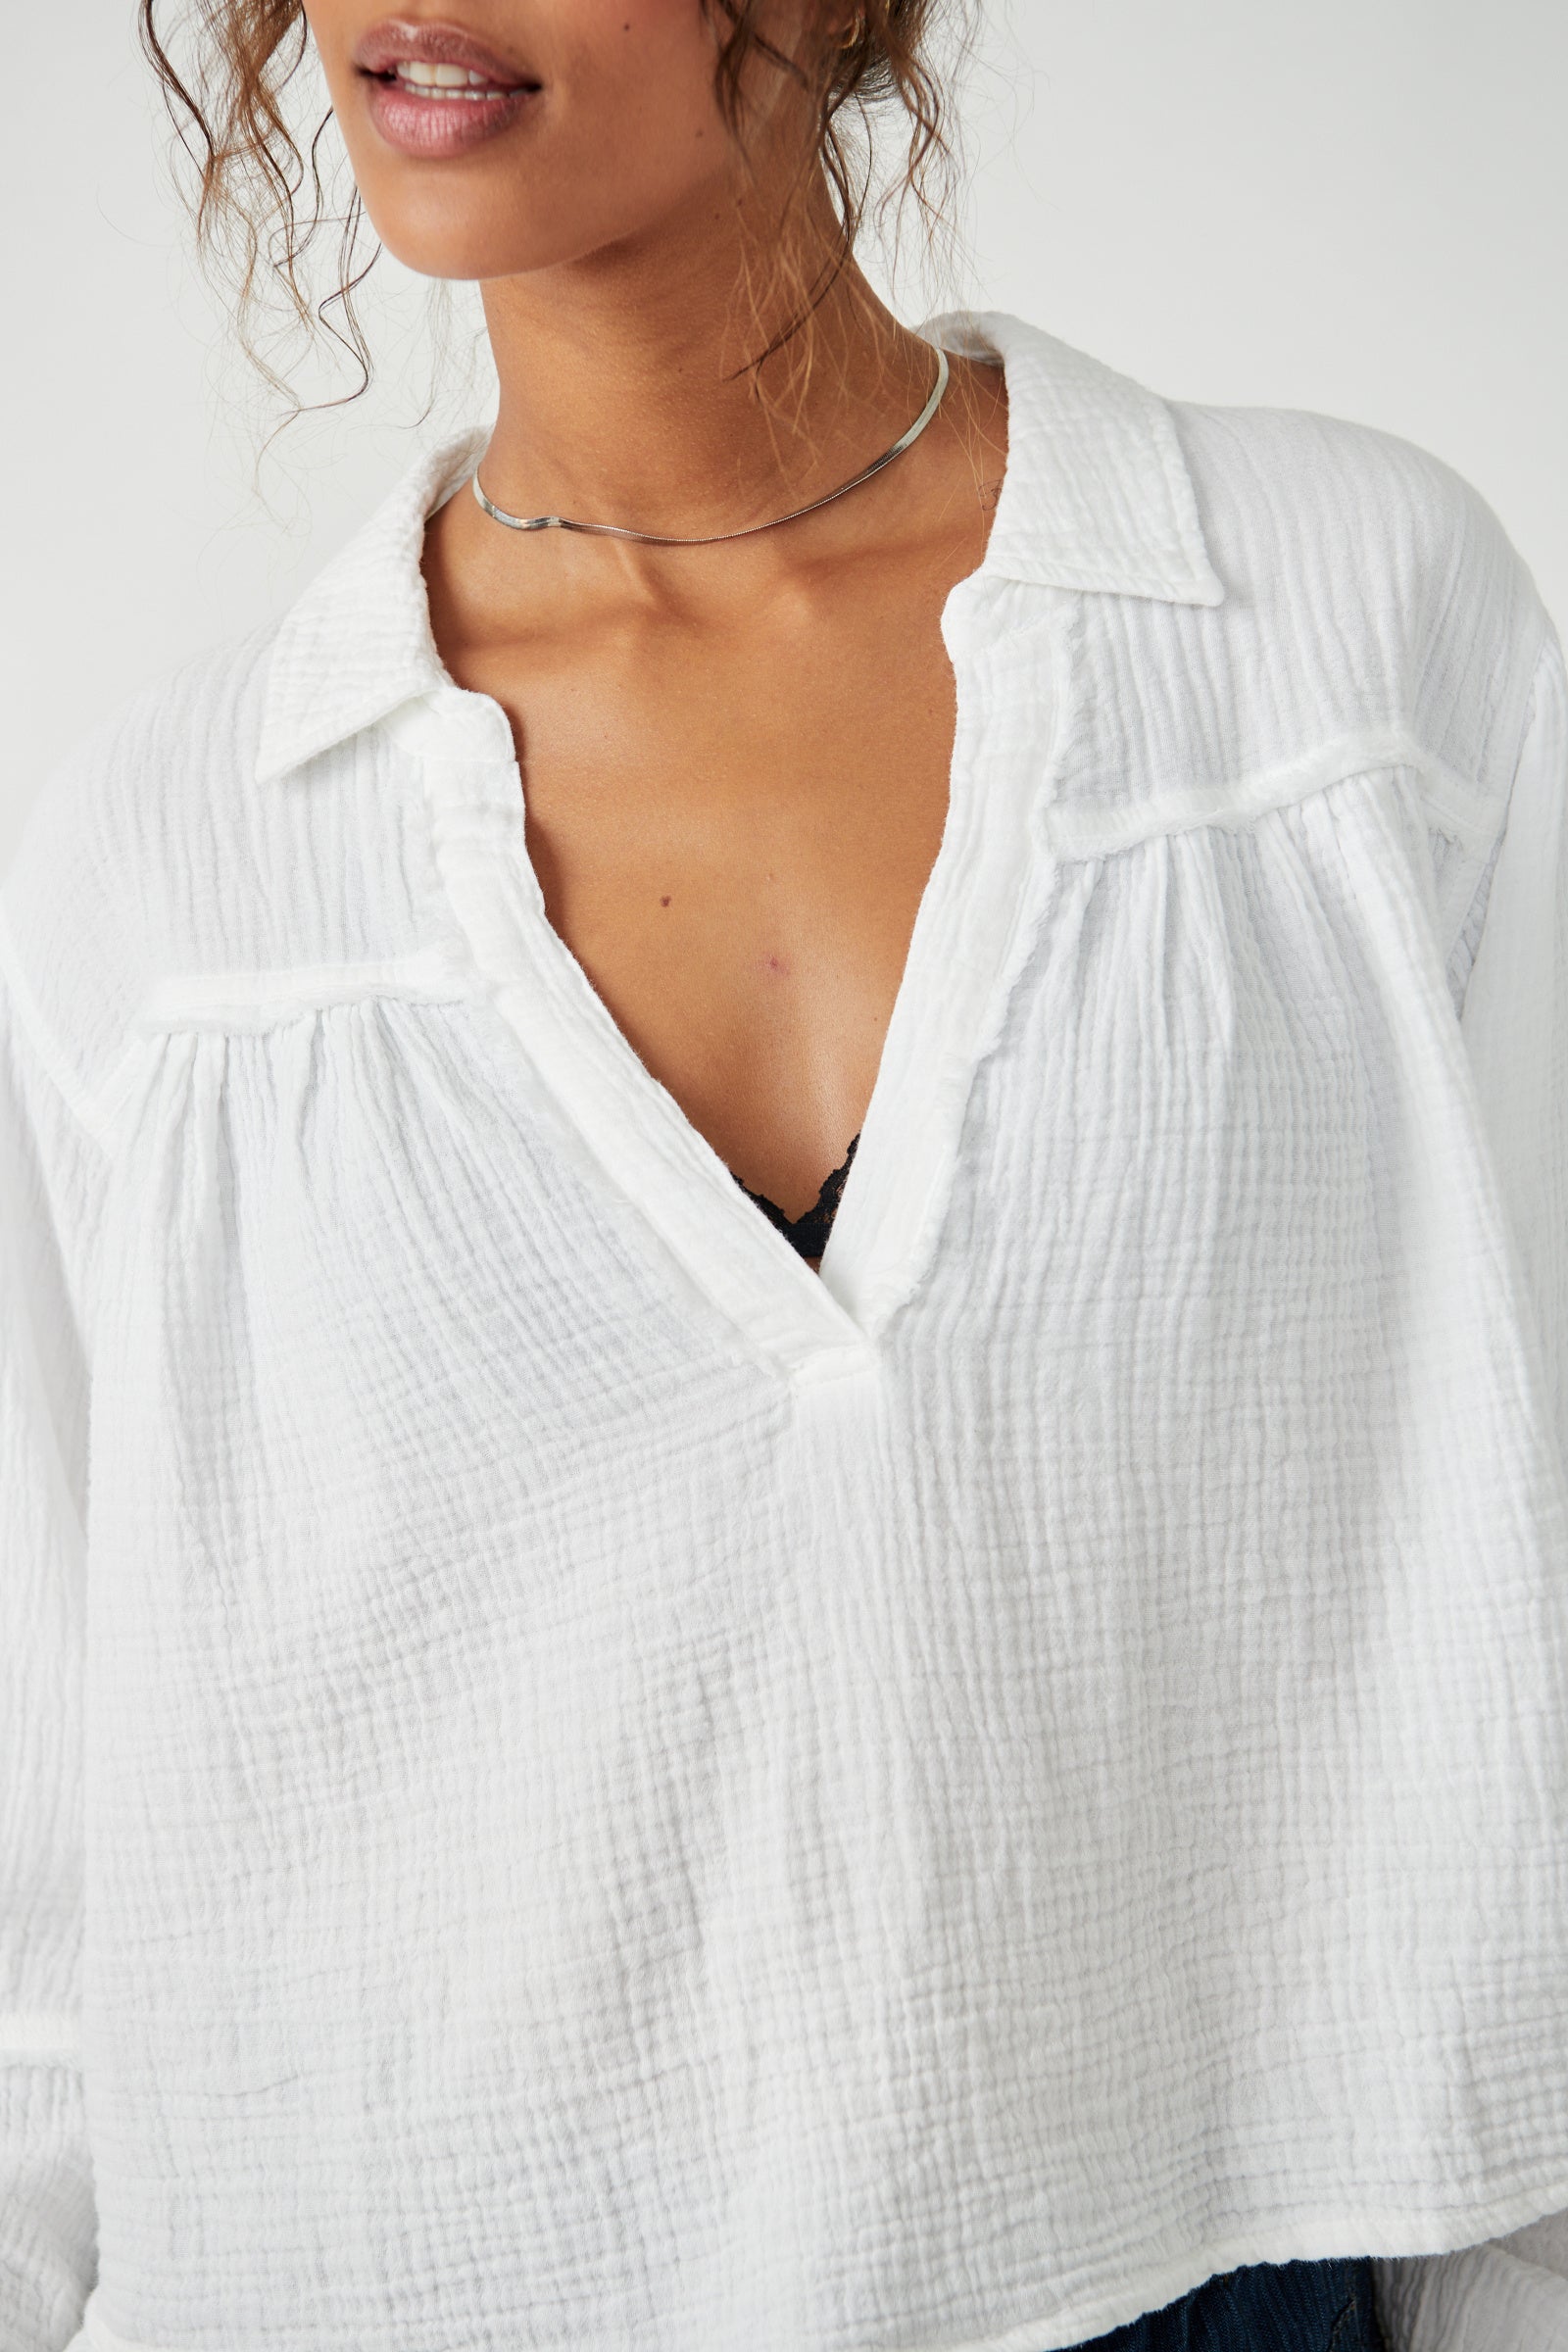 FREE PEOPLE YUCCA DOUBLE CLOTH IN OPTIC WHITE